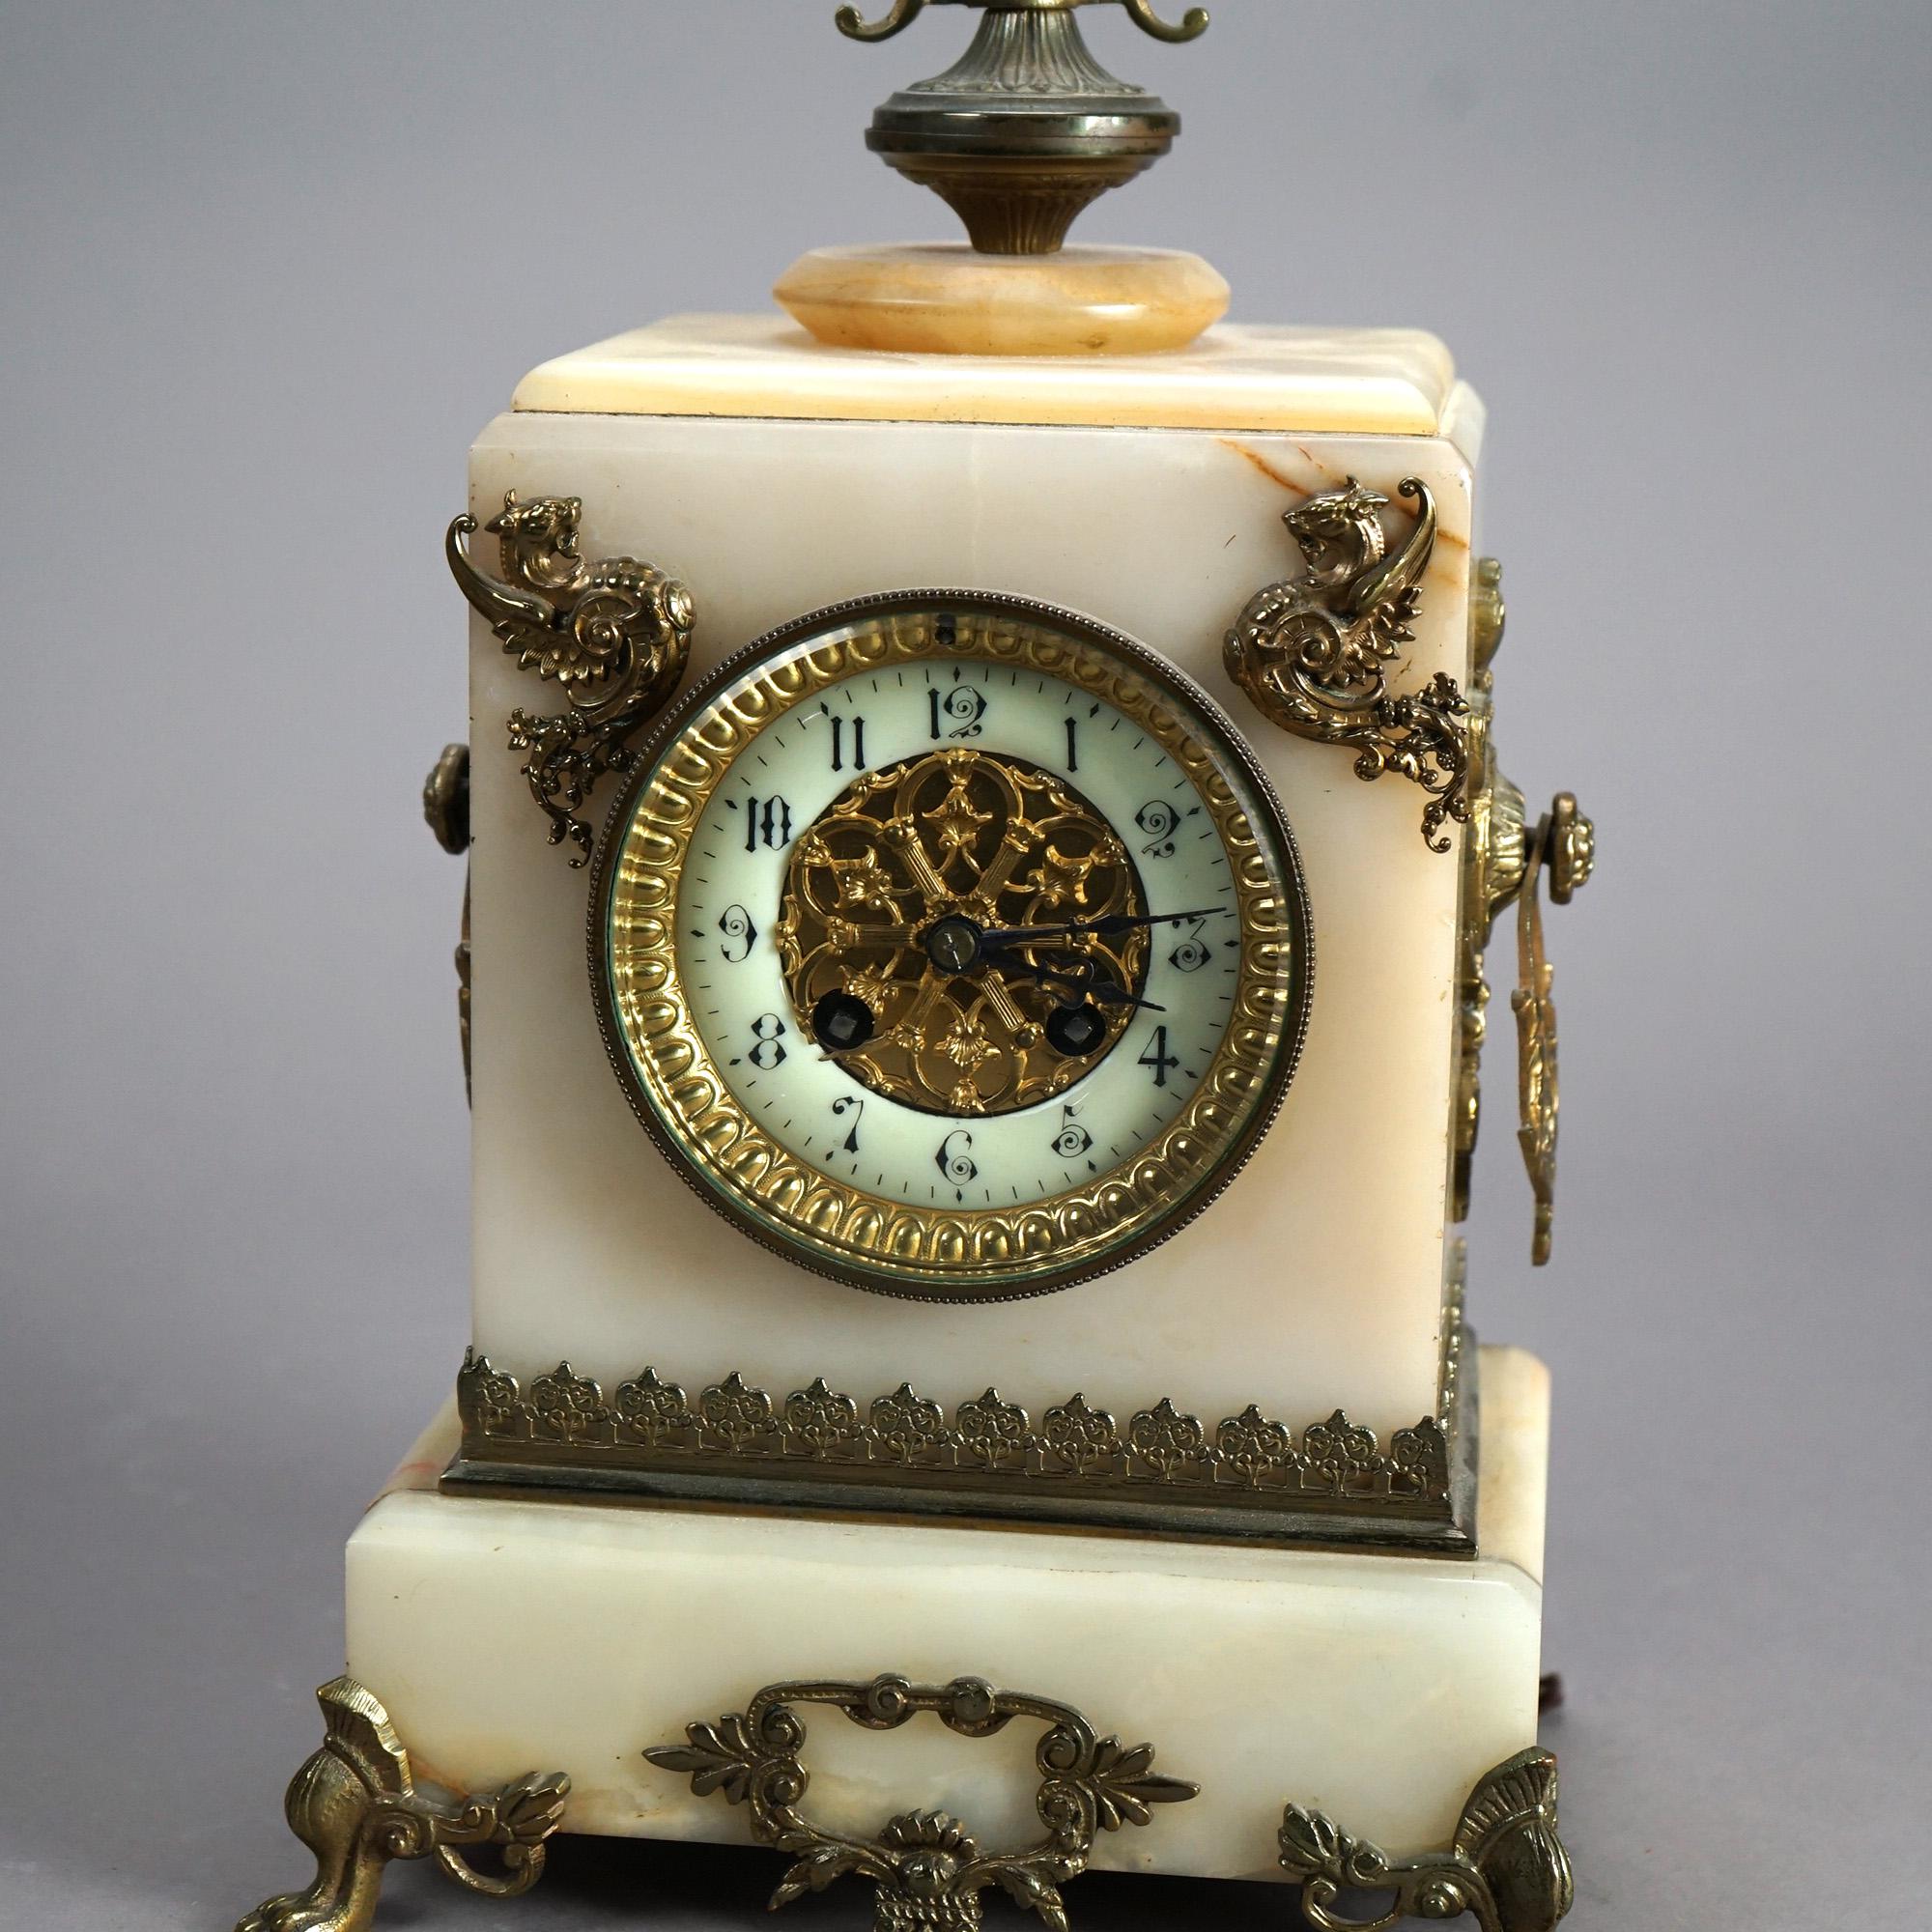 An antique Victorian carriage clock offers marble case with cast bronze mounts including Amphiptere dragons and foliate elements, c1880

Measures- 15''H x 8.75''W x 5.75''D